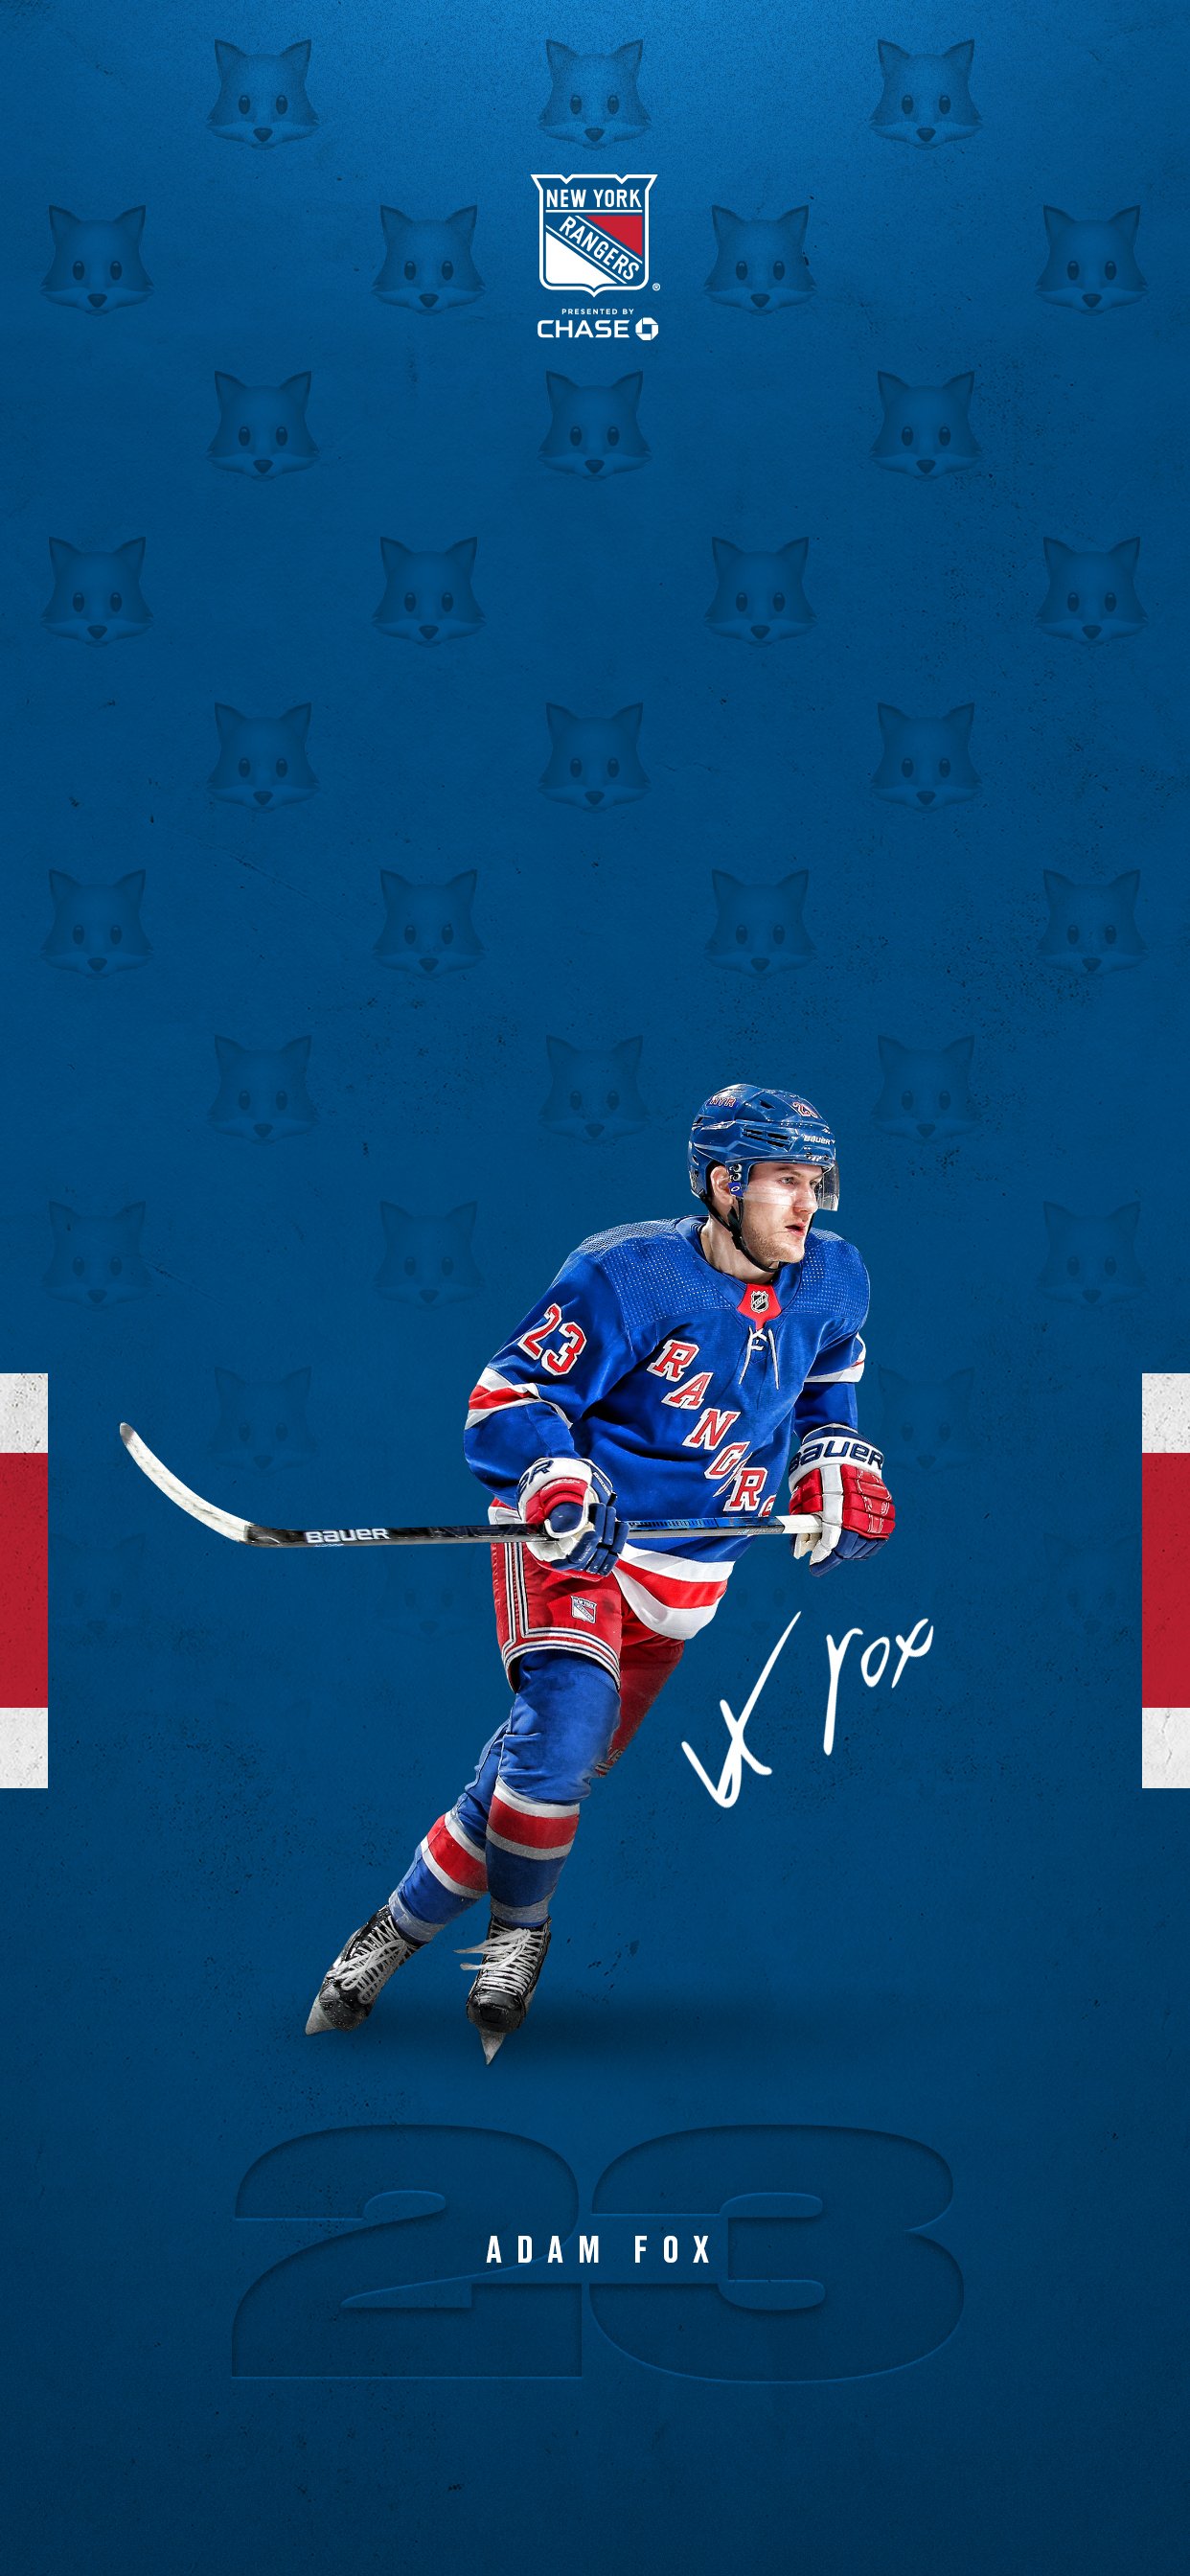 Wallpaper Wednesday: Pick the Players, You pick three. We make the  wallpapers on Wednesday. Go., By New York Rangers